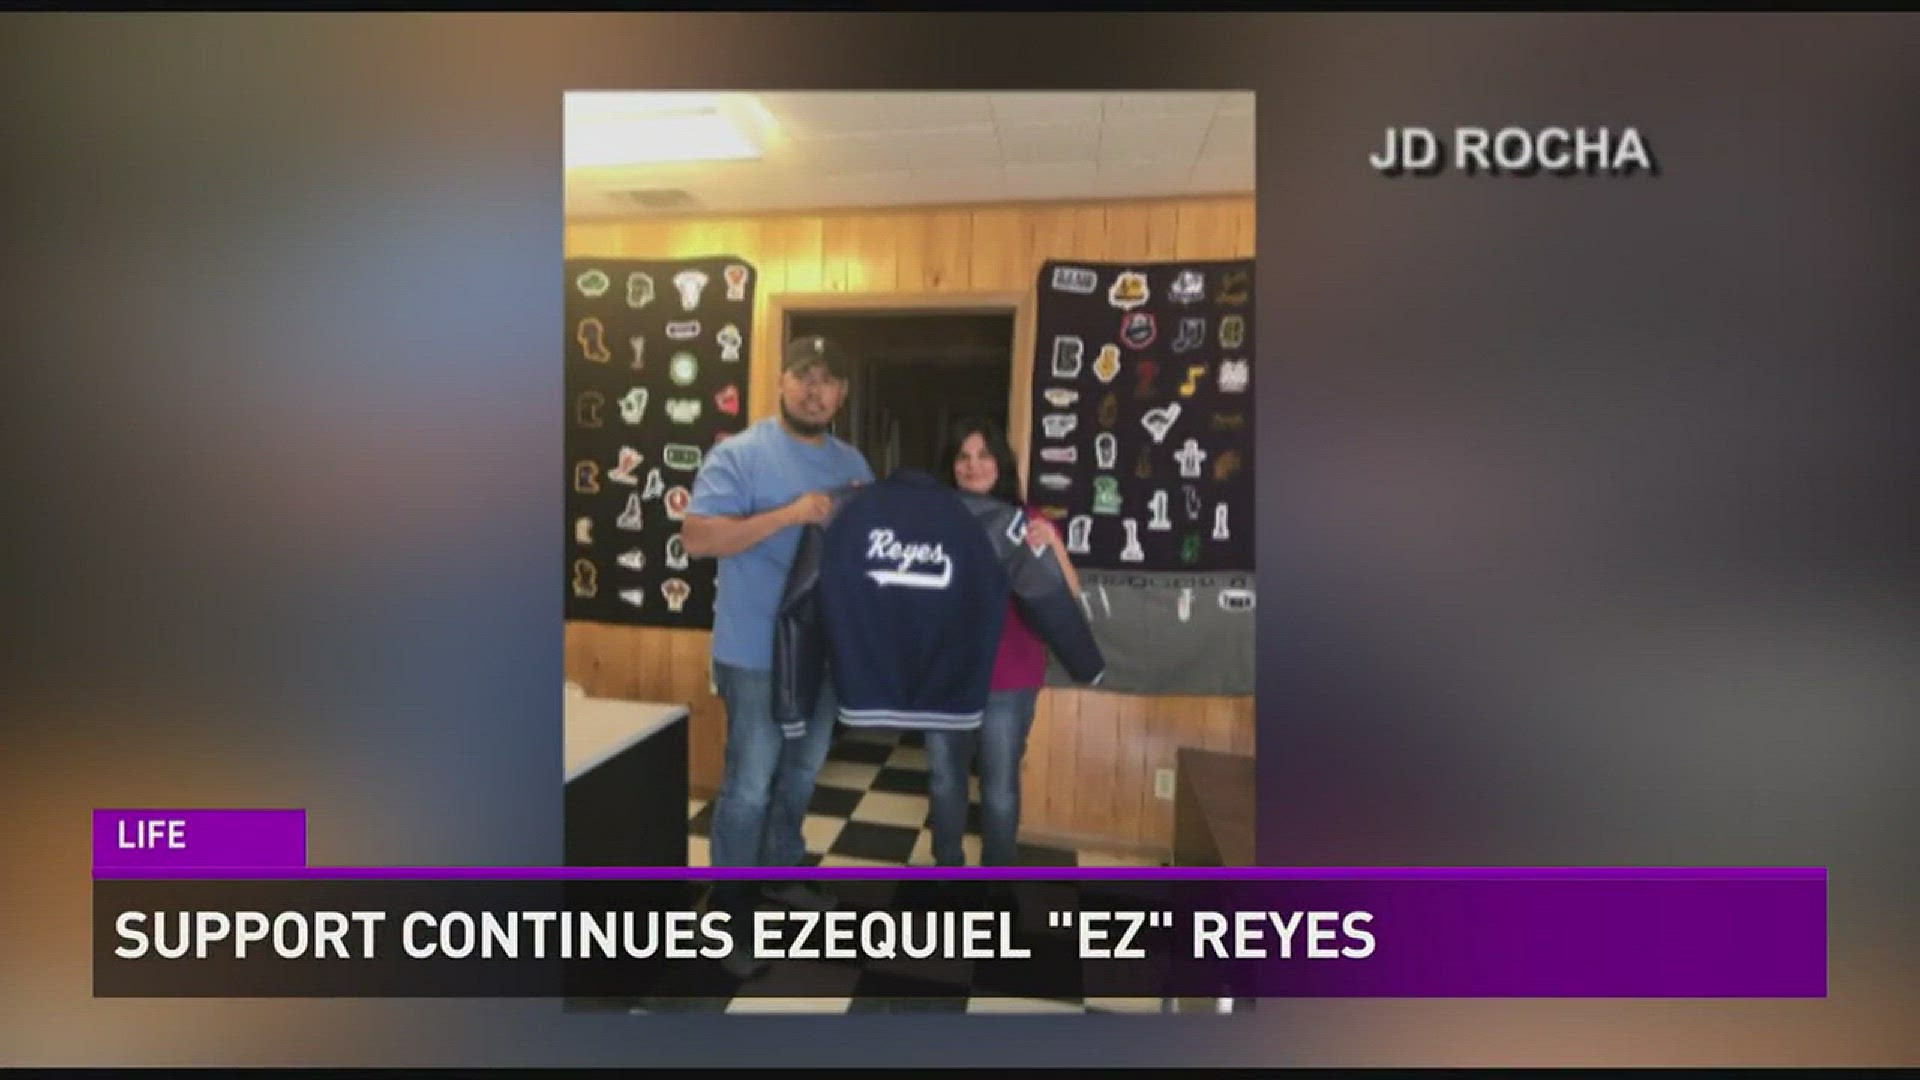 The support continues for Lake View student Ezequiel "EZ" Reyes.